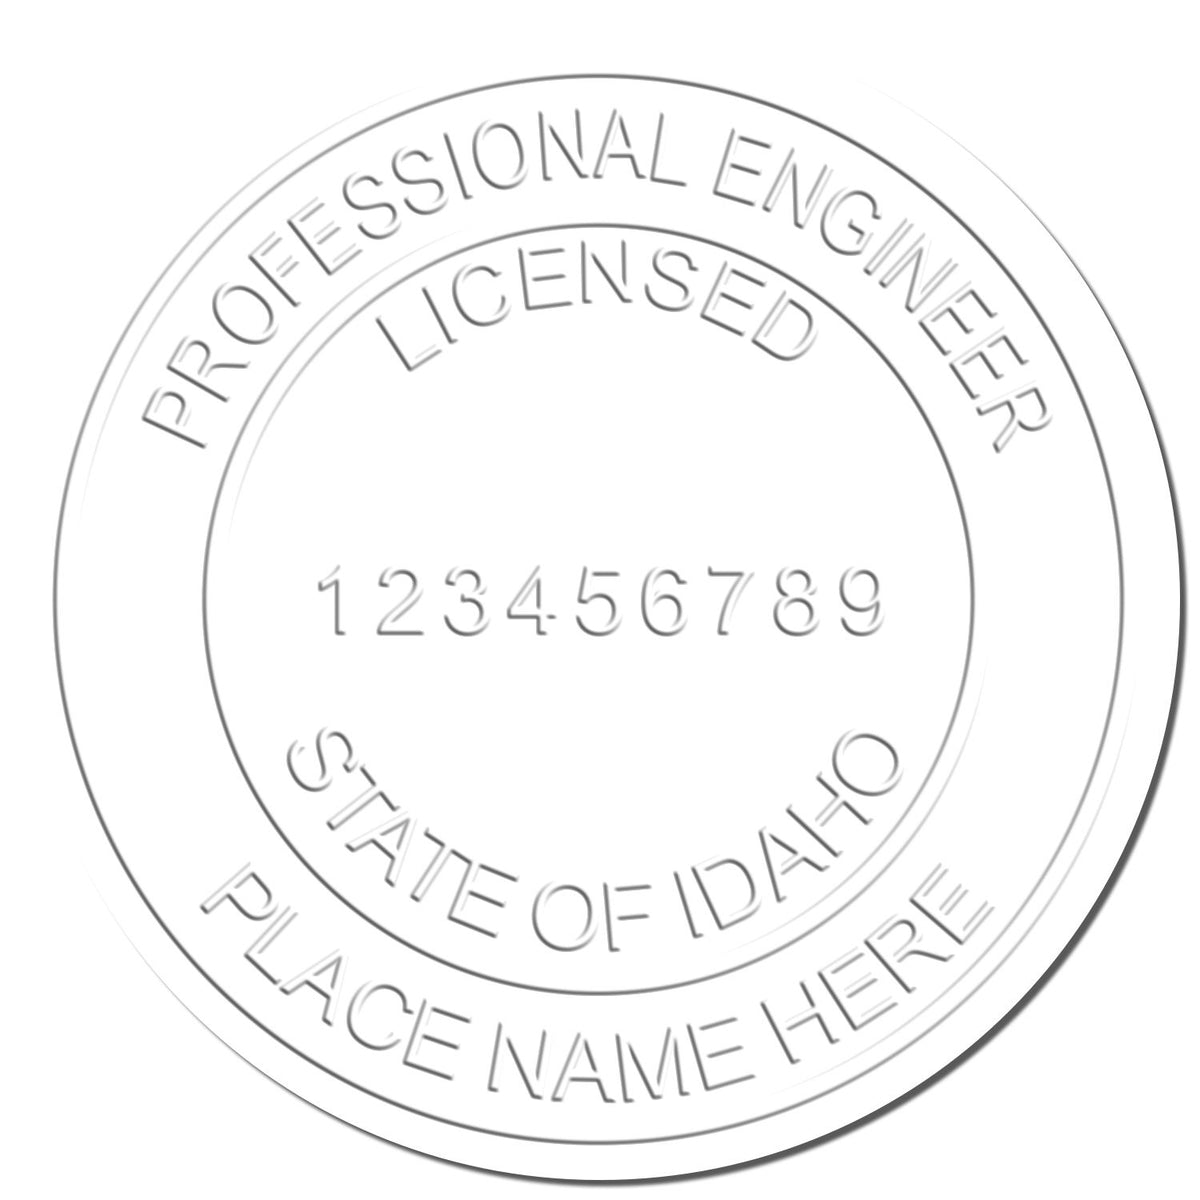 This paper is stamped with a sample imprint of the Hybrid Idaho Engineer Seal, signifying its quality and reliability.